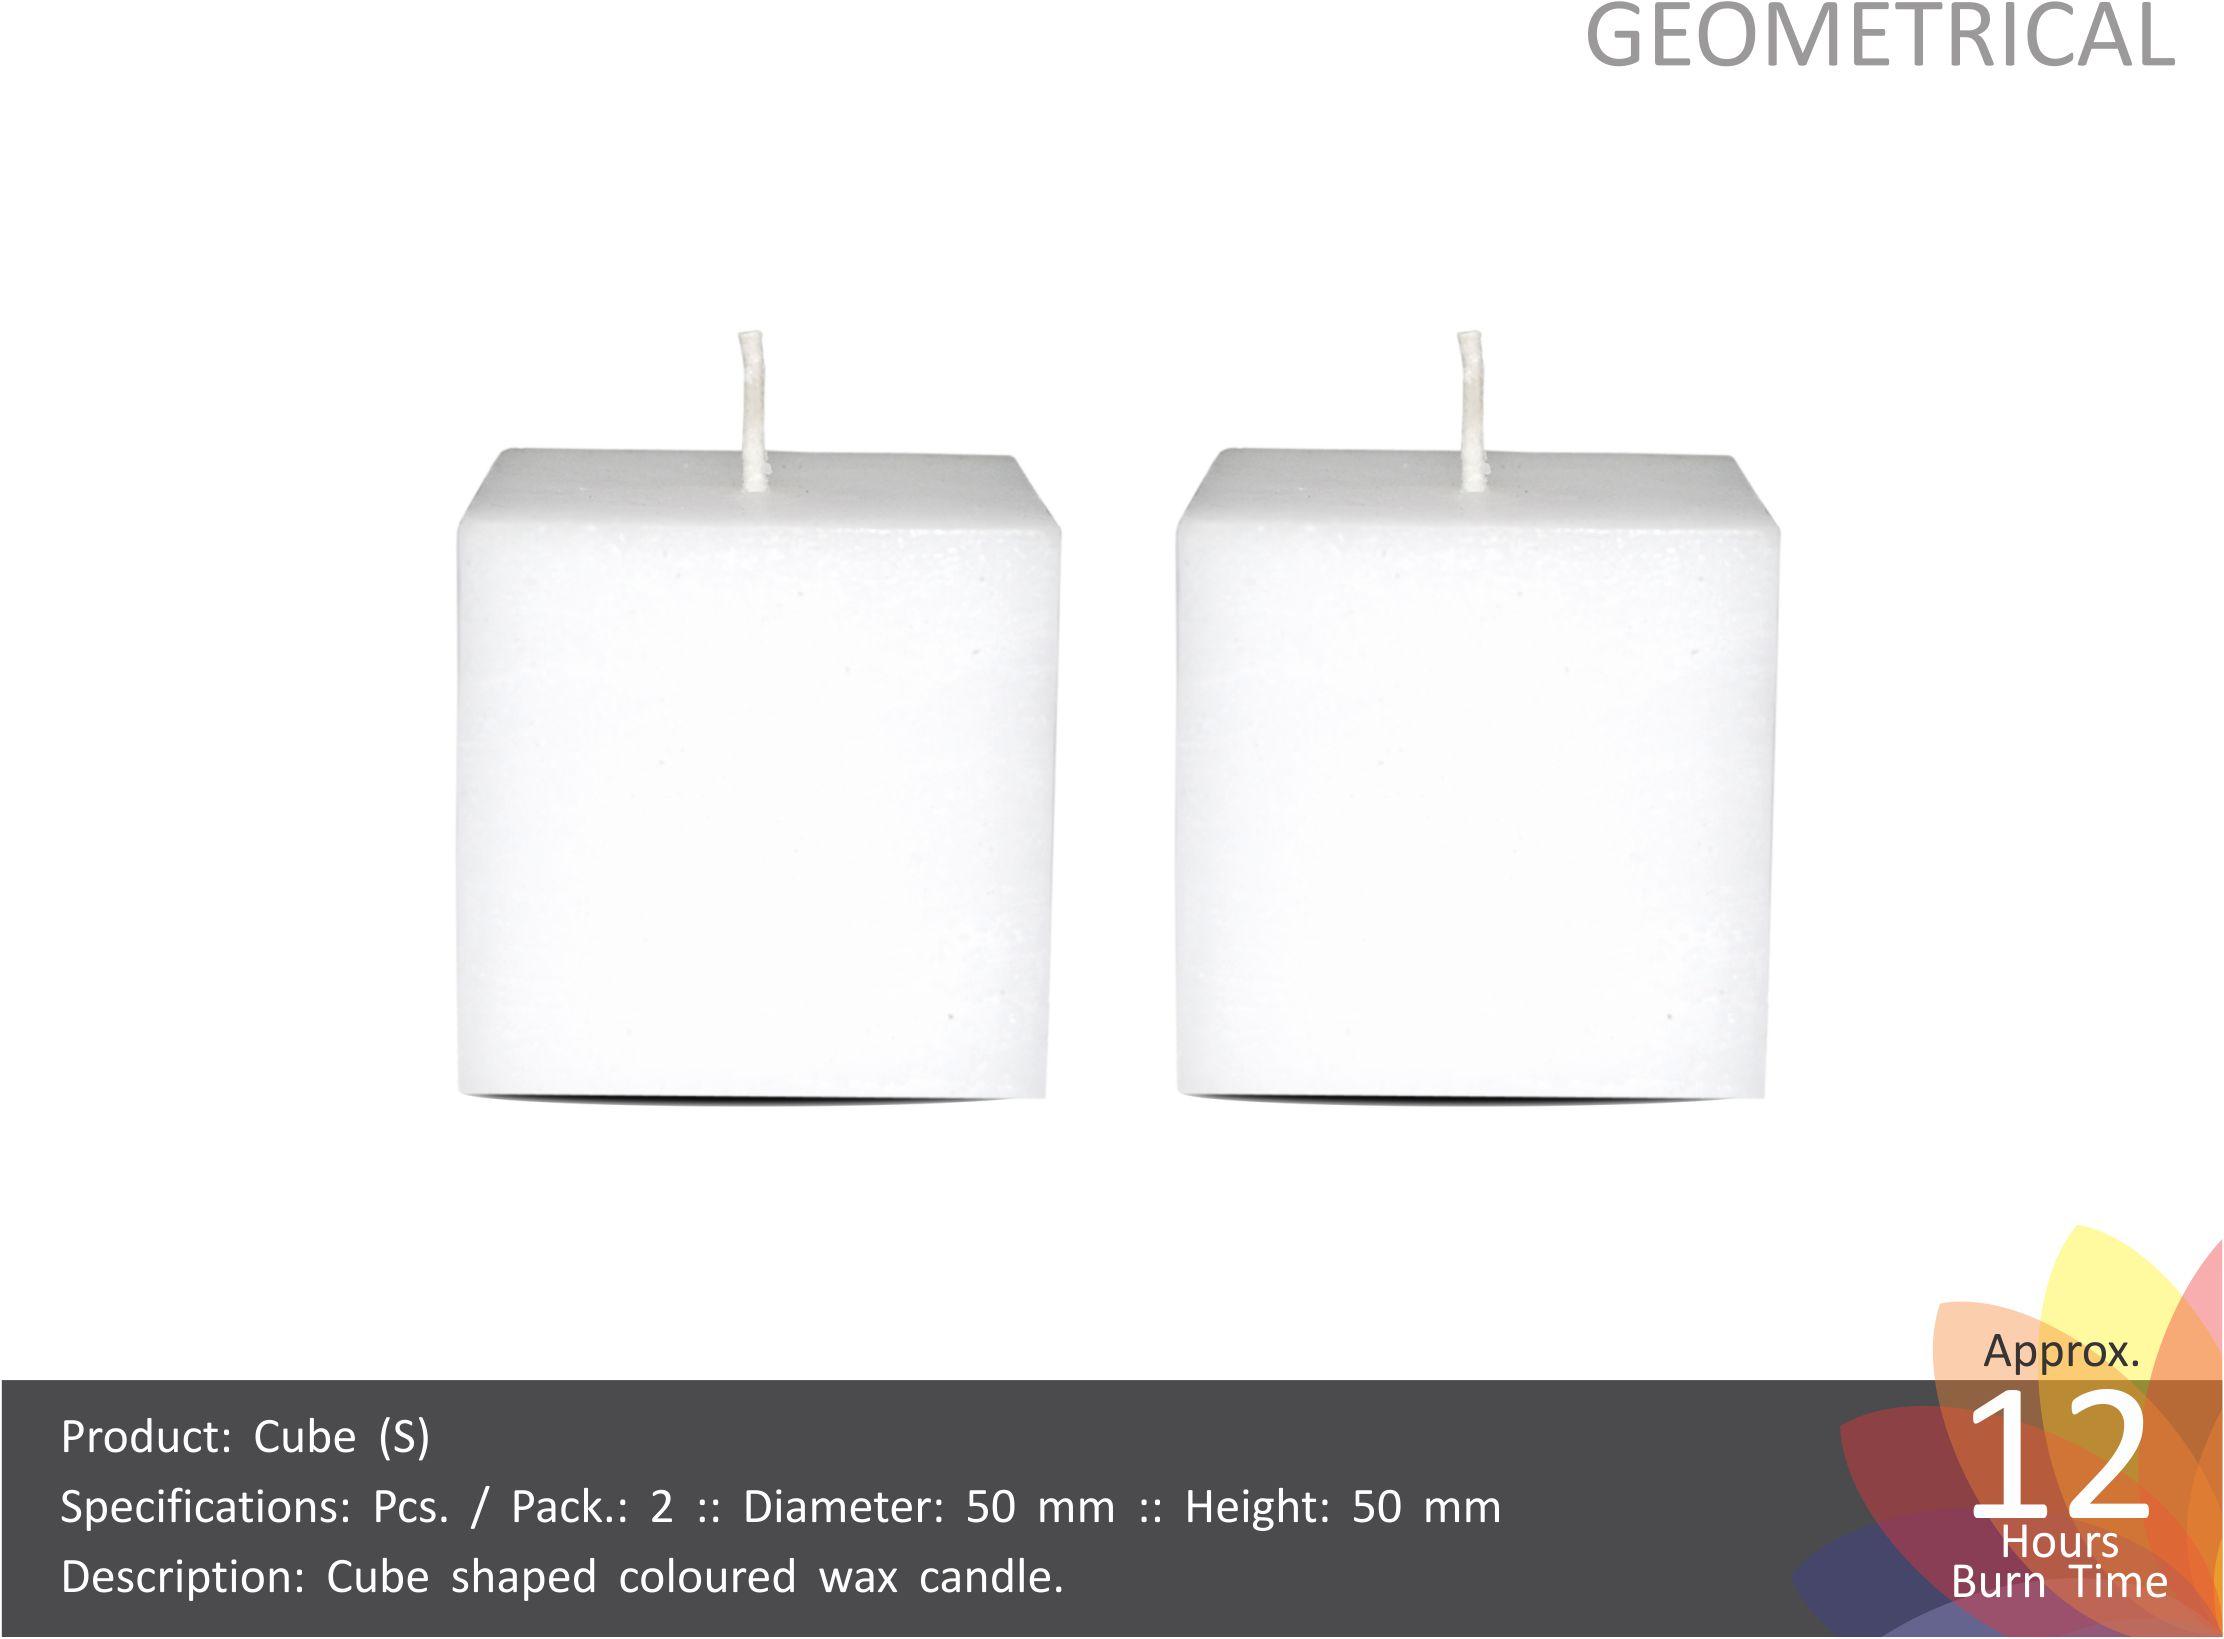 Square Paraffin Wax Cube Candle (S), Color : White